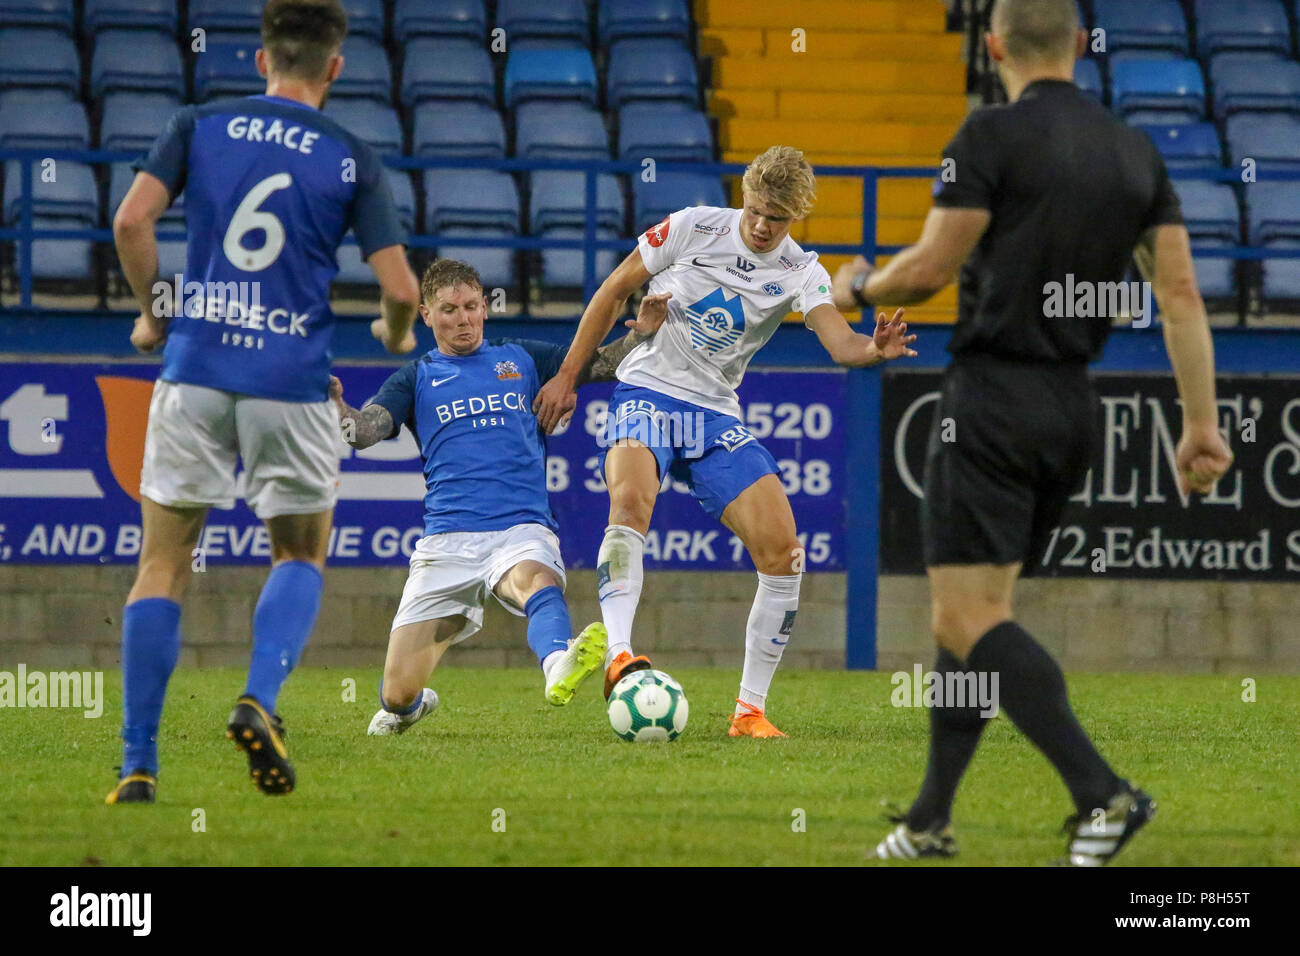 Mourneview Park, Lurgan, Northern Ireland. 11 July 2018. UEFA Europa League (First Qualifying Round), Glenavon v Molde. Molde's Erling Braut Haland (white) in action at Mourneview Park.Credit: David Hunter/Alamy Live News. Stock Photo